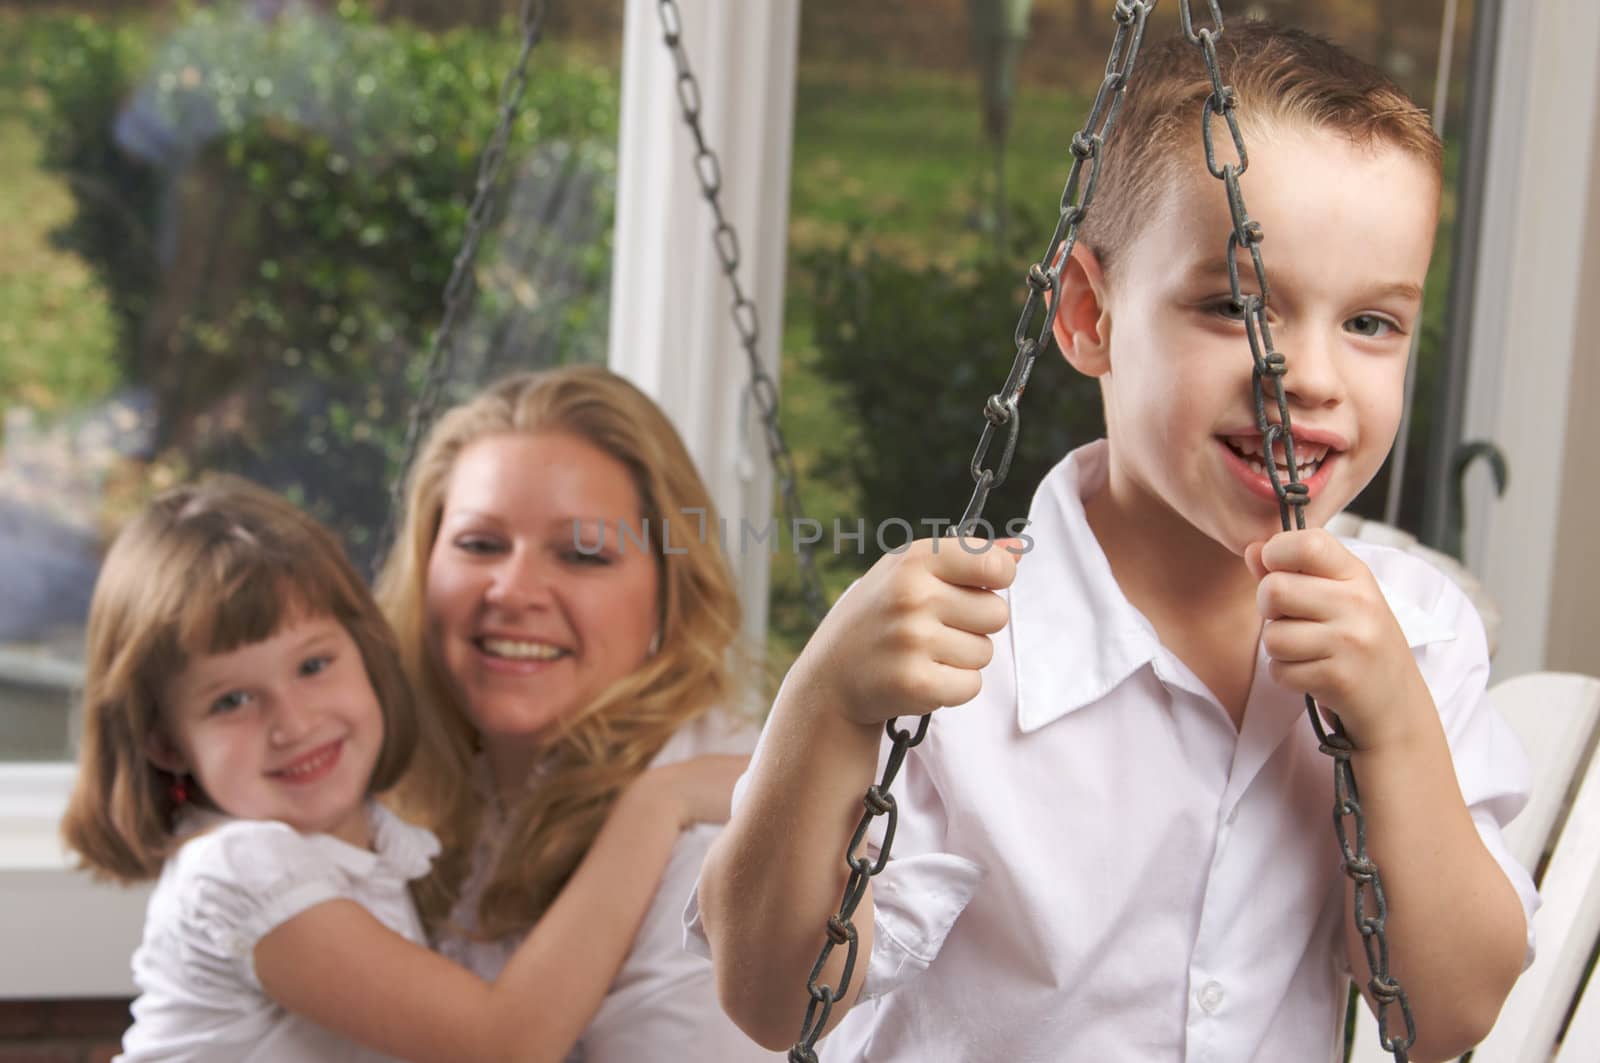 Young Boy Poses with Mom and Sister by Feverpitched